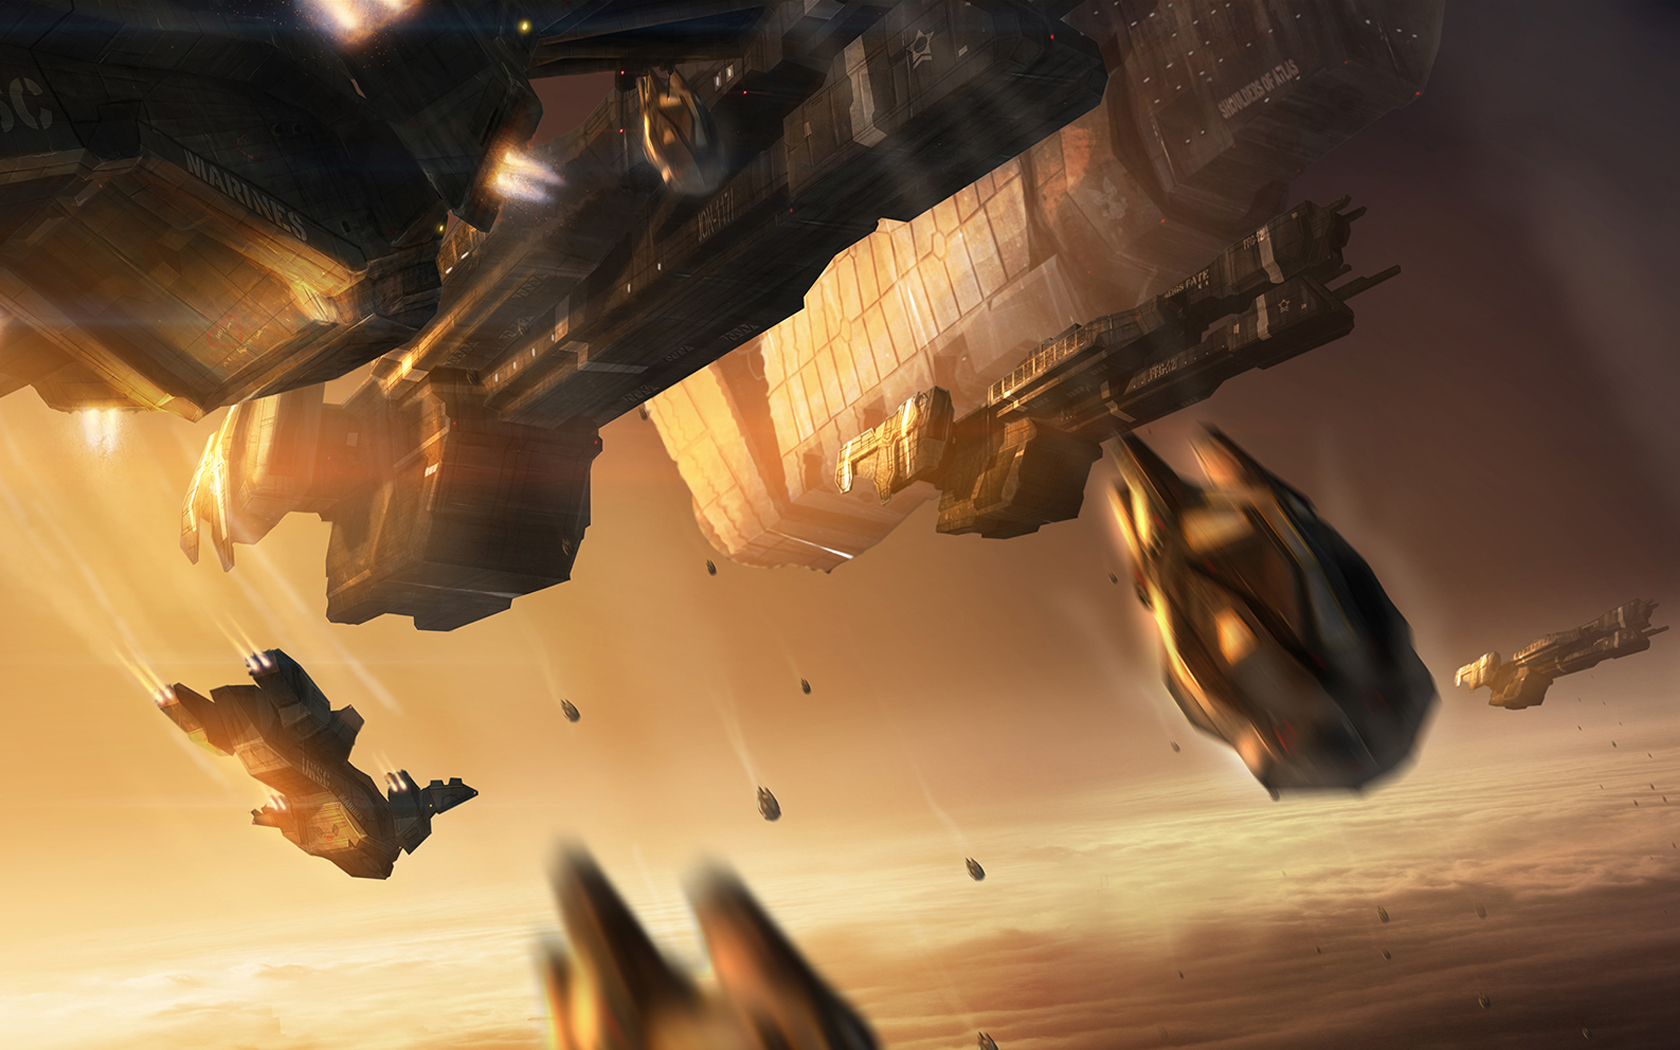 Halo Video Game Art Video Games Spaceship Science Fiction Halo 3 ODST Pelican Halo ODST 1680x1050